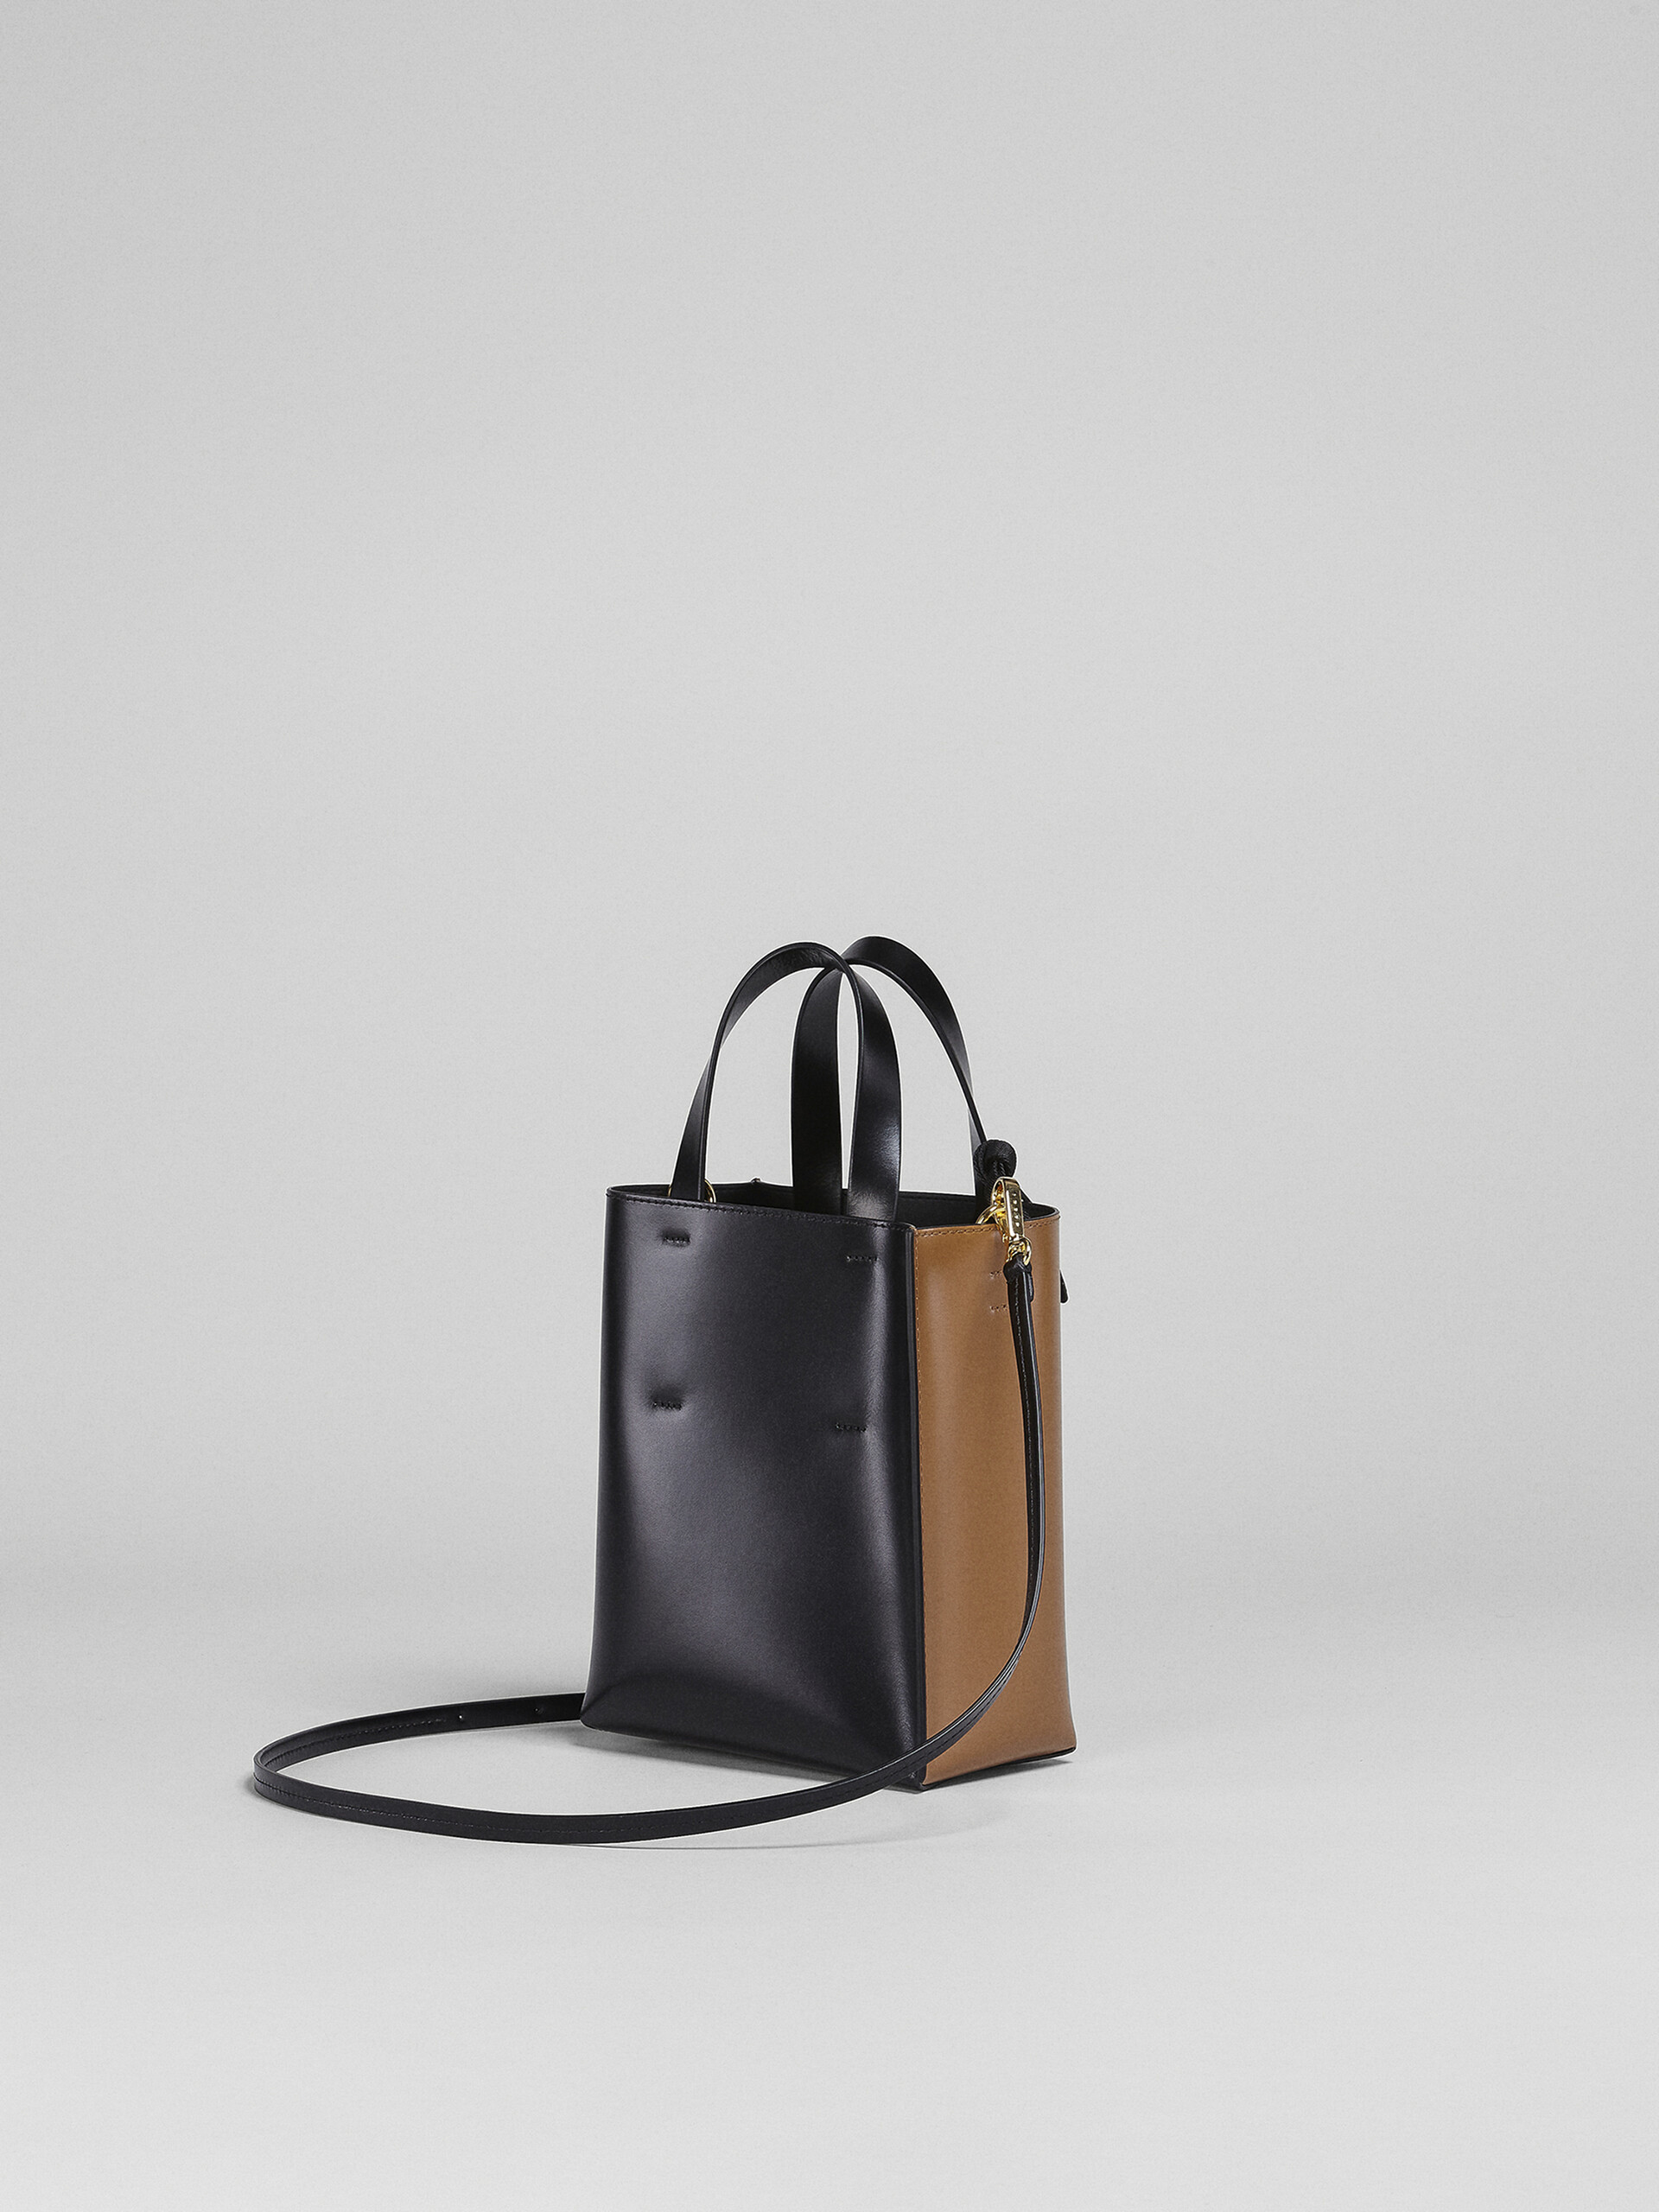 MUSEO mini bag in brown and black leather - Shopping Bags - Image 3